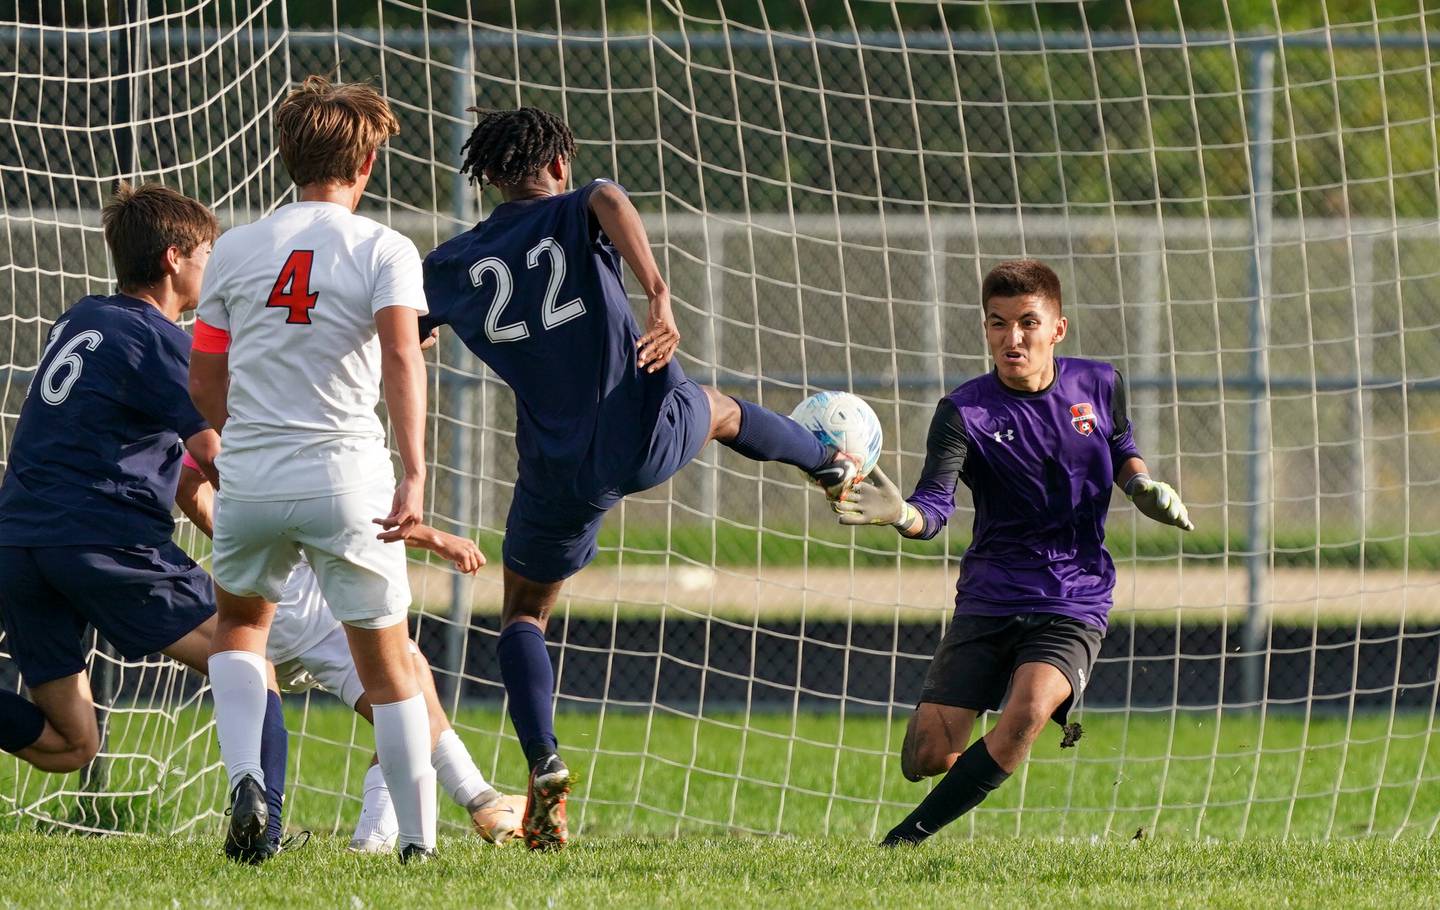 Oswego East's Marlin Hoffman (22) shoots the ball for a goal against Oswego’s Angel Moreno (1) during a soccer match at Oswego East High School on Tuesday, Sept. 26, 2023.